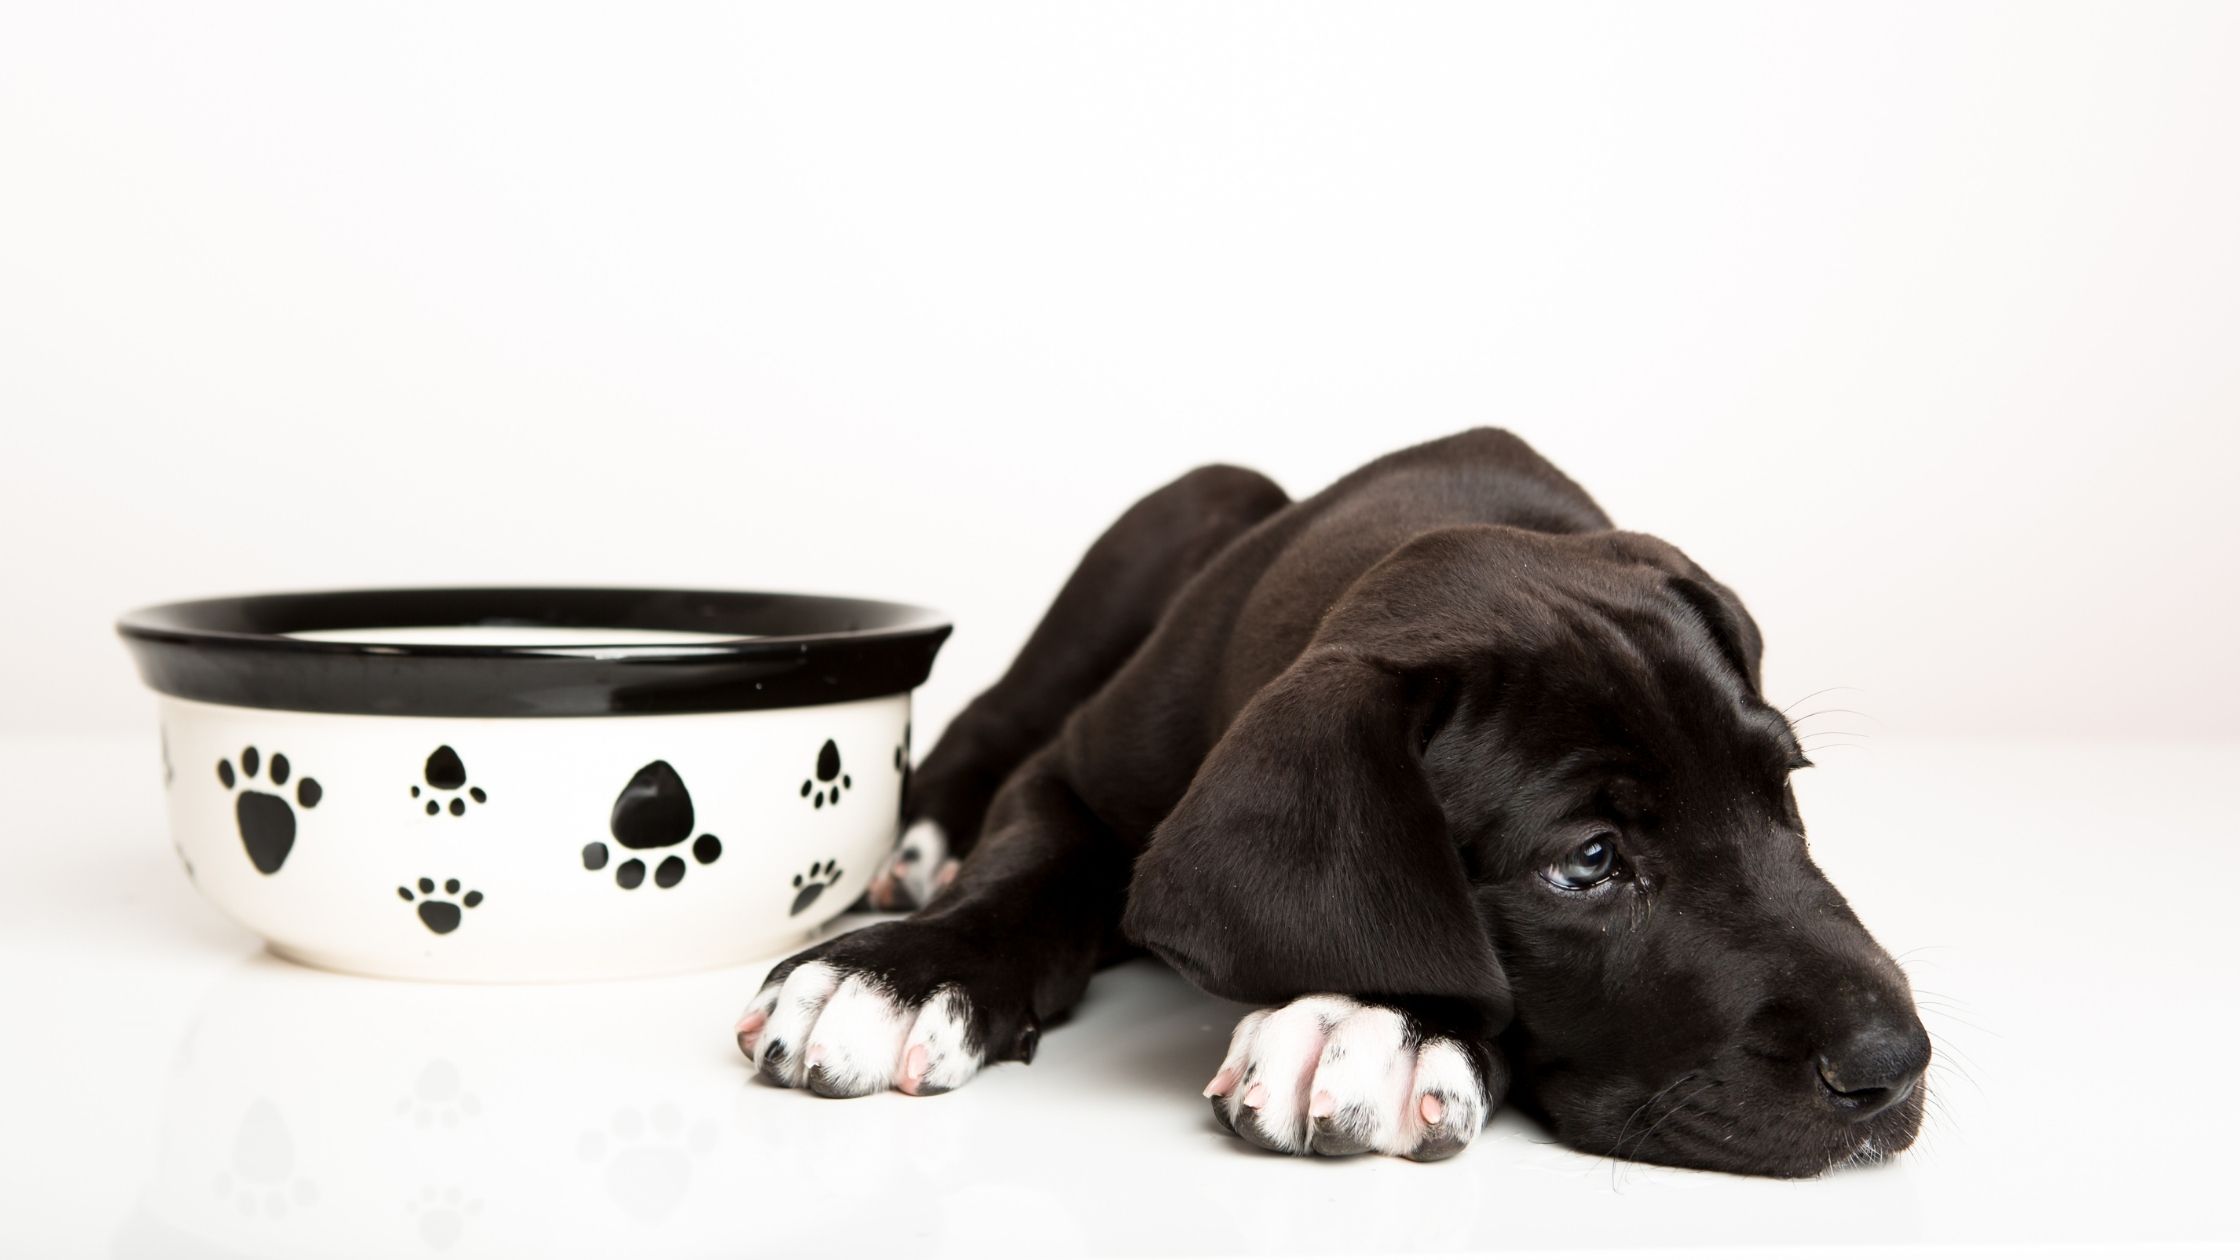 Does your dog turn his snout up at his dinner? Find out why your dog may be a picky eater and what you can do about it!